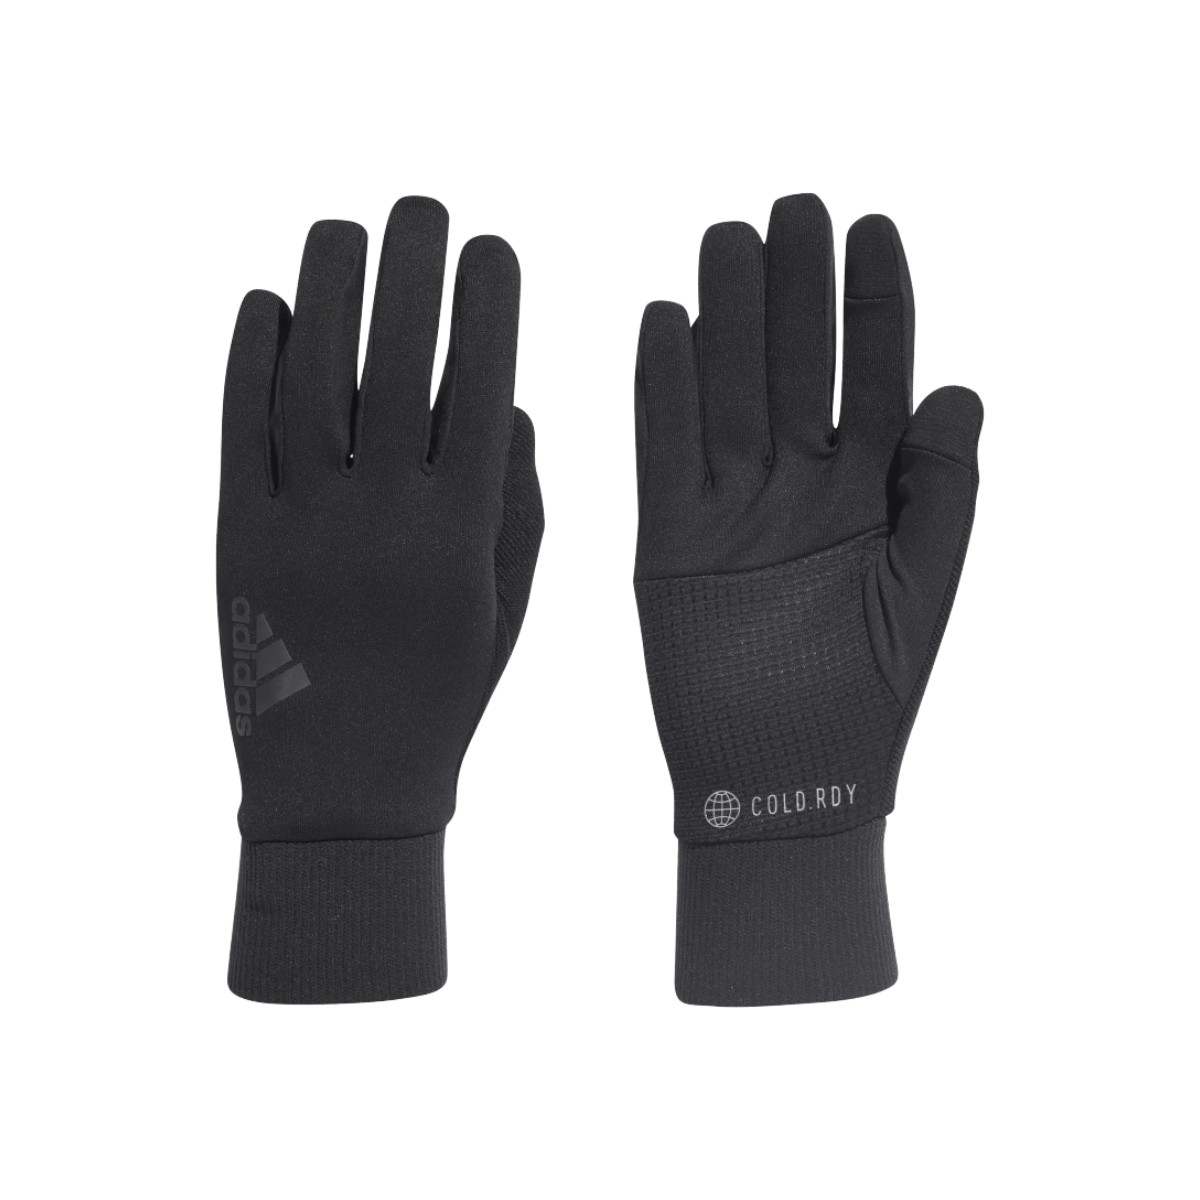 Gants Adidas Cold Rdy Noir, Taille S